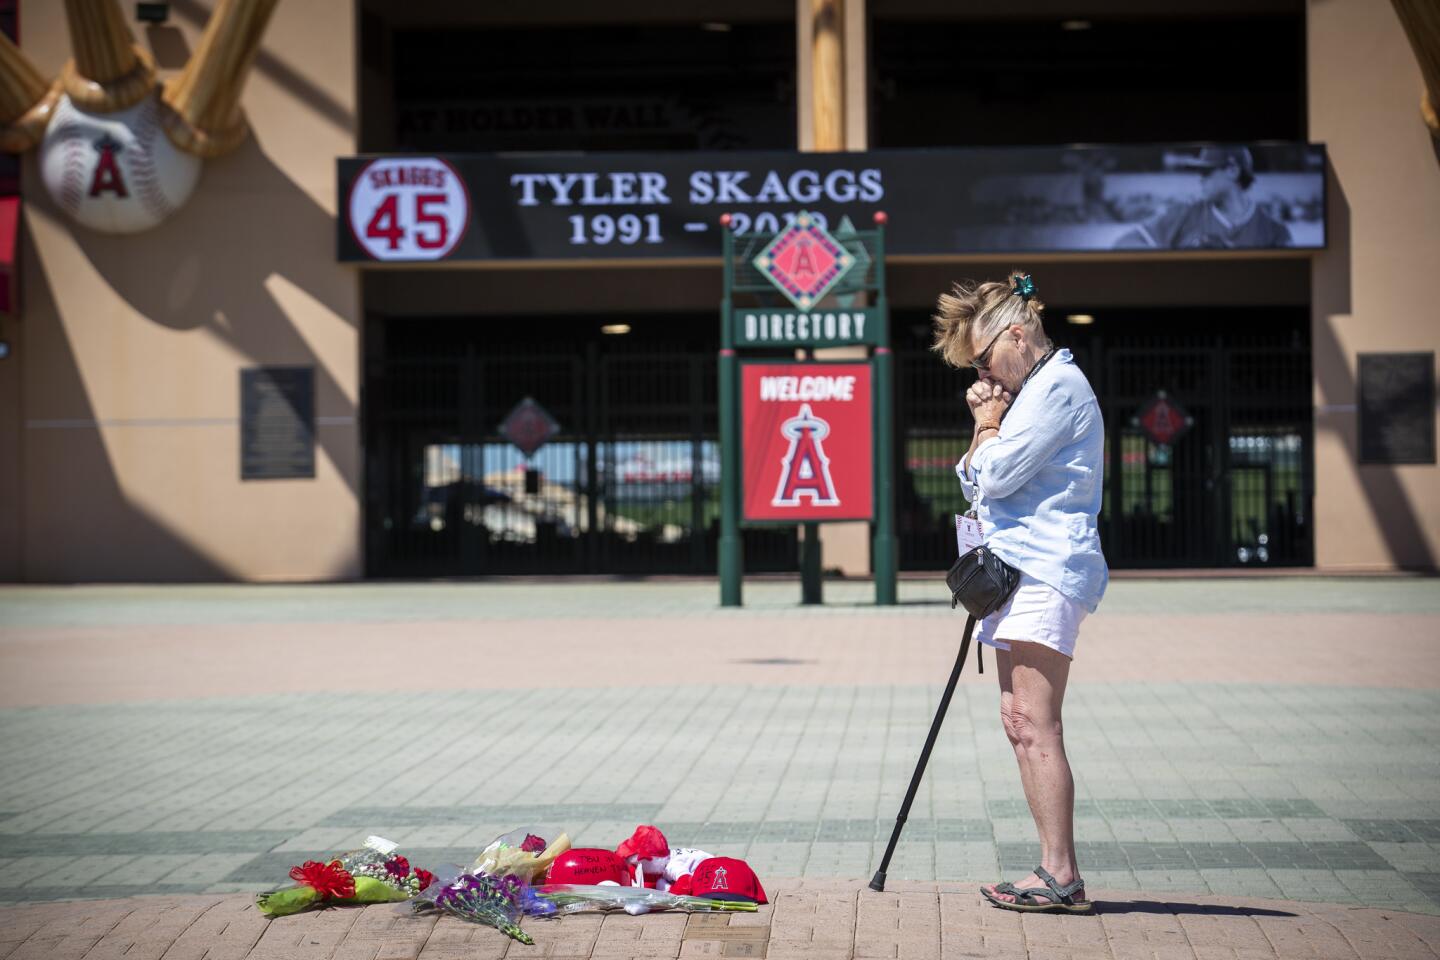 Angels fan Nancy Dodson of Garden Grove spends a quiet moment by herself at a growing memorial for Tyler Skaggs at Angel Stadium.